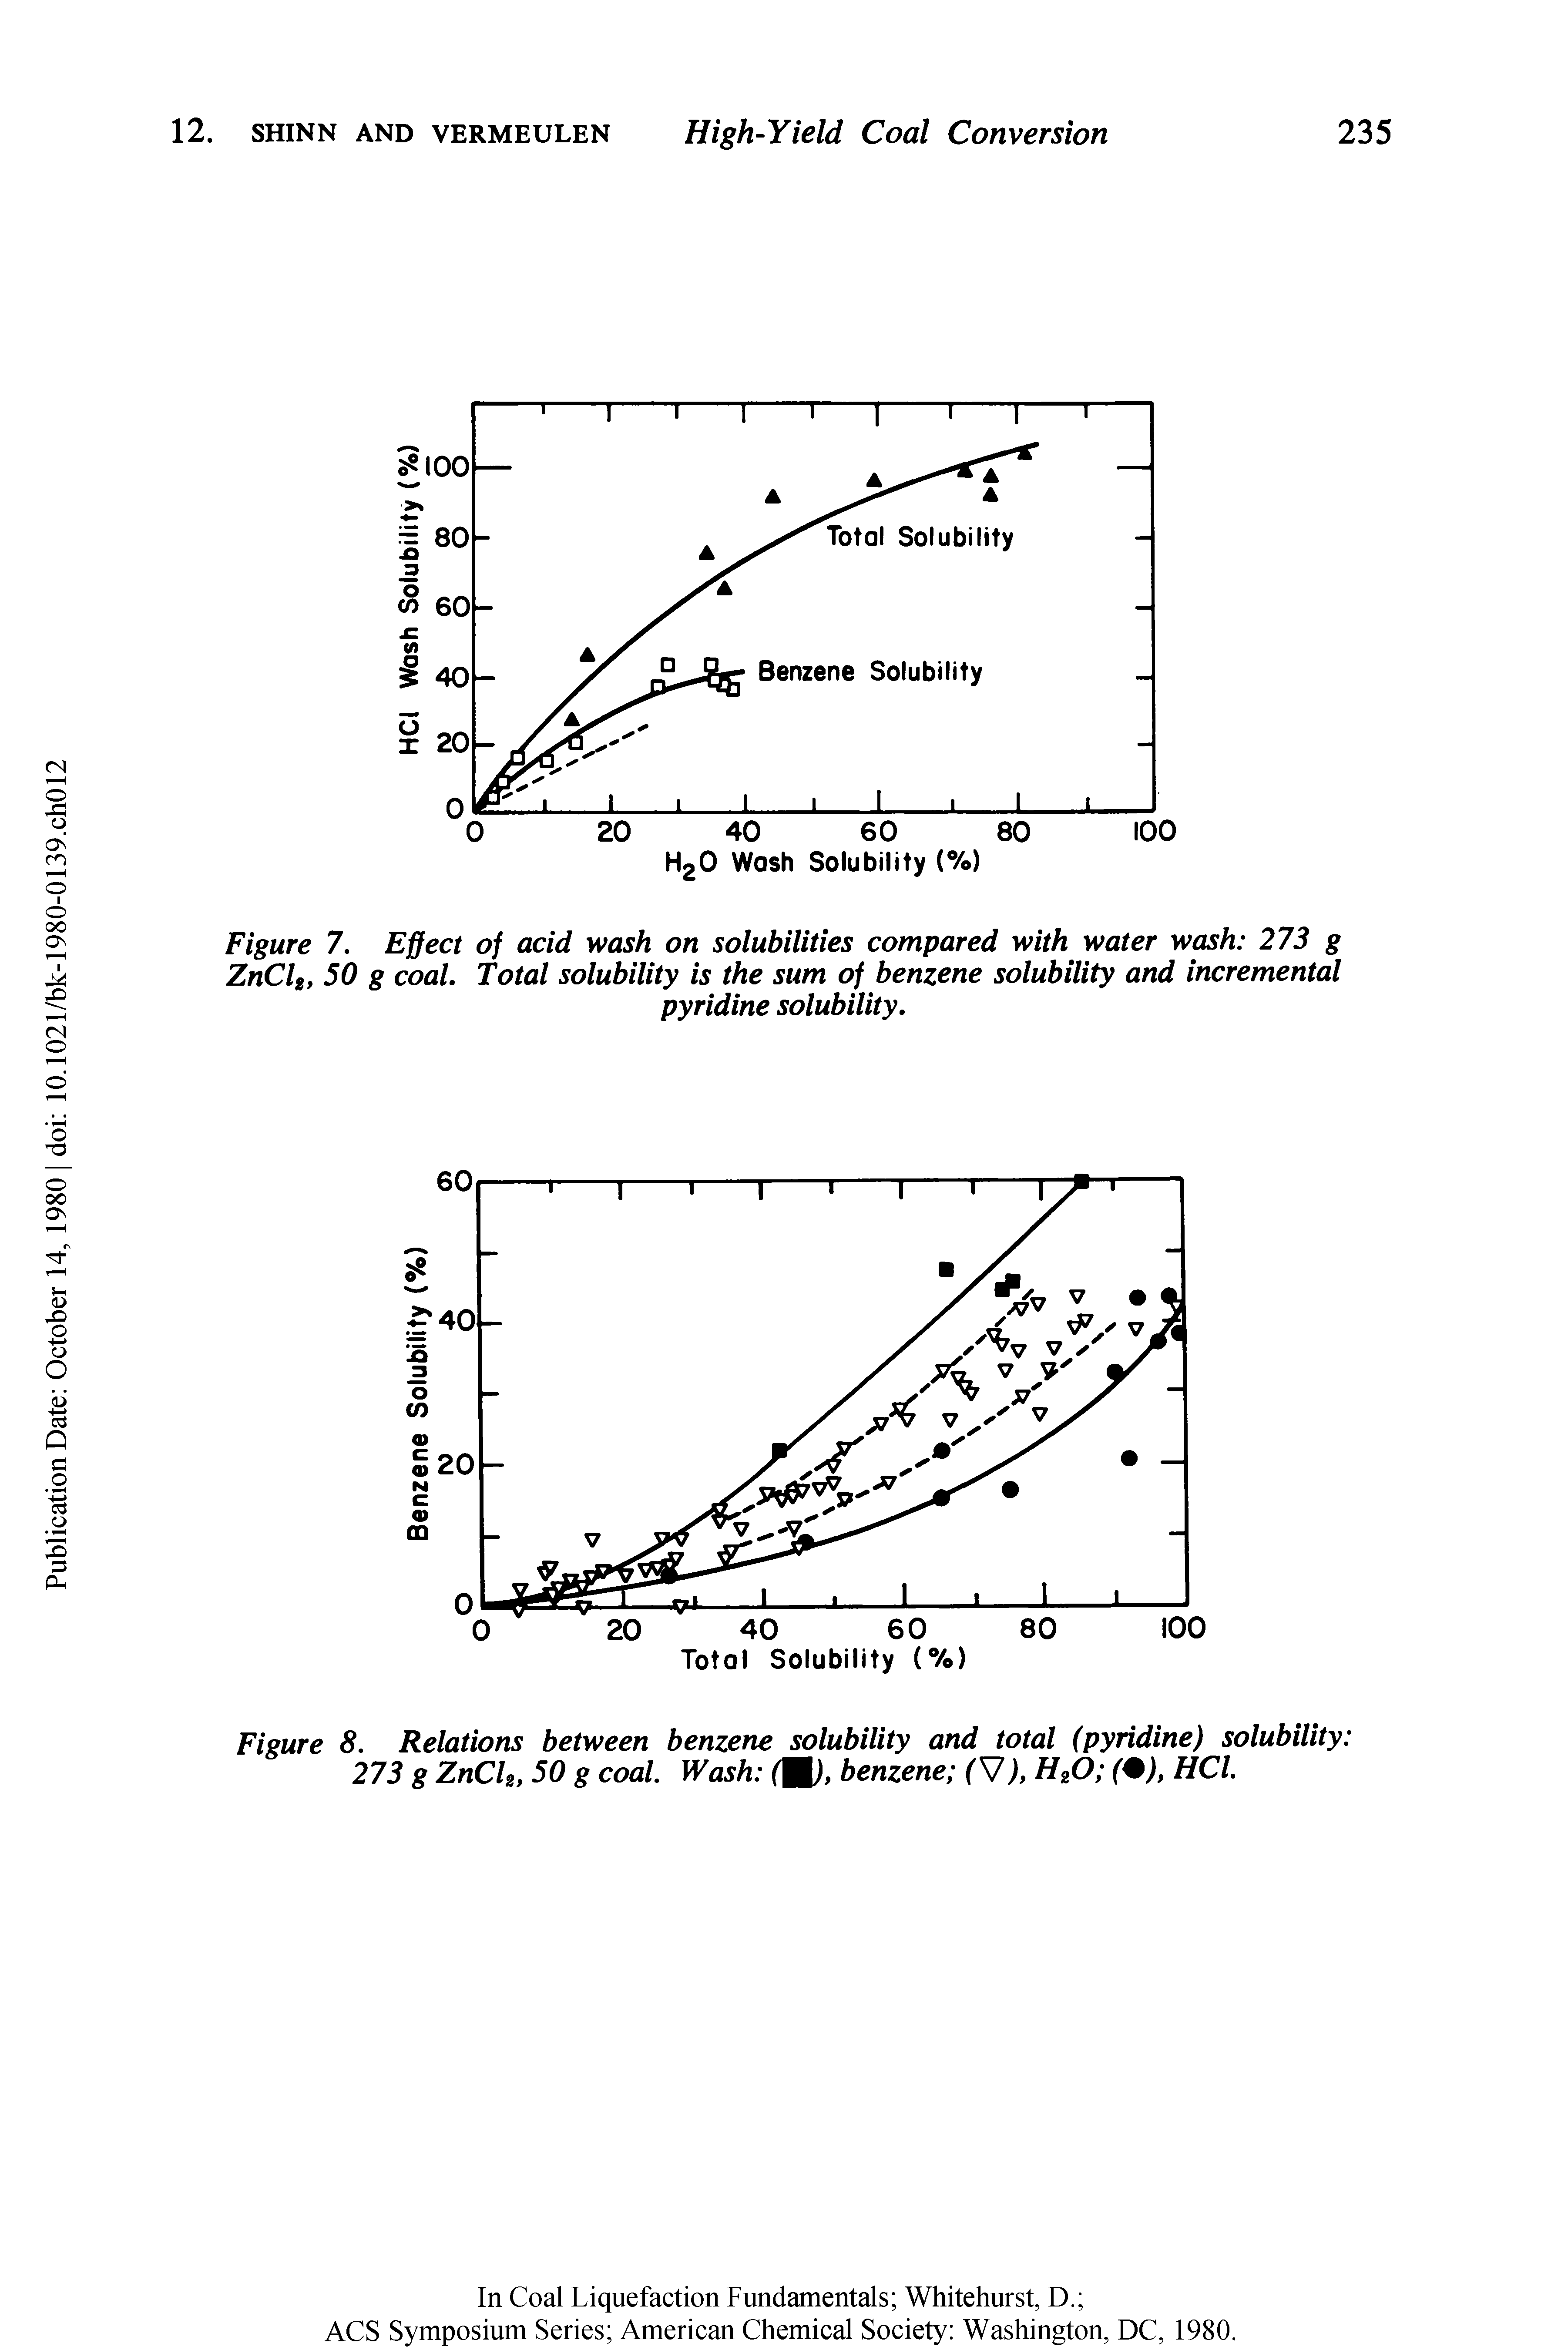 Figure 7. Effect of acid wash on solubilities compared with water wash 273 g ZnClg, 50 g coal. Total solubility is the sum of benzene solubility and incremental...